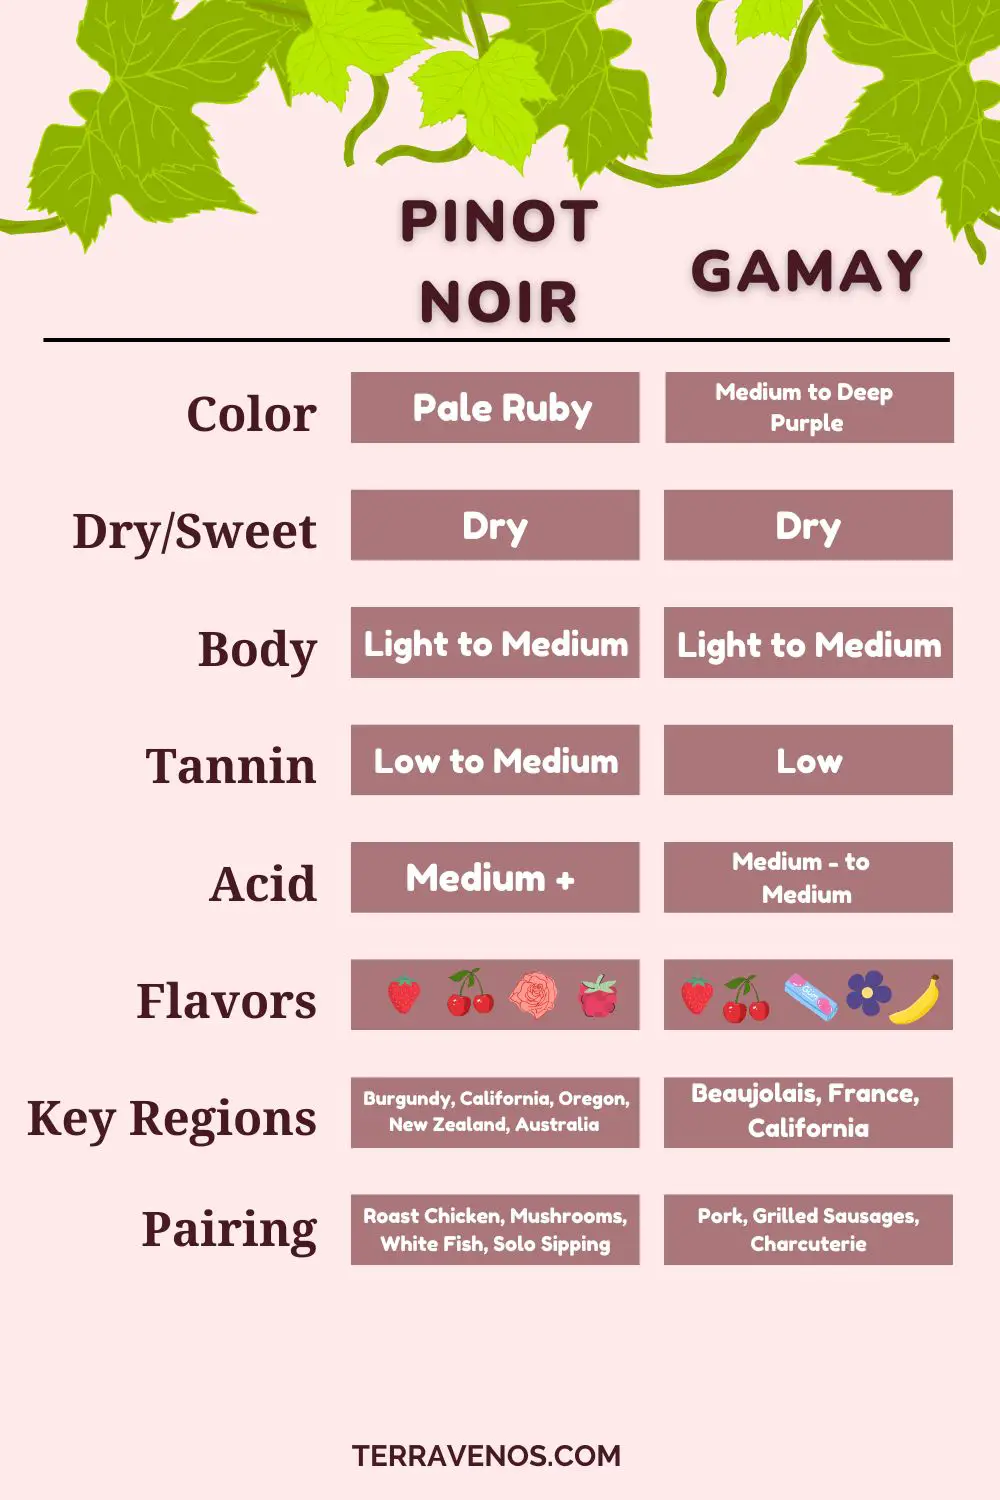 pinot-noir-vs-gamay-wine-comparison-infographic